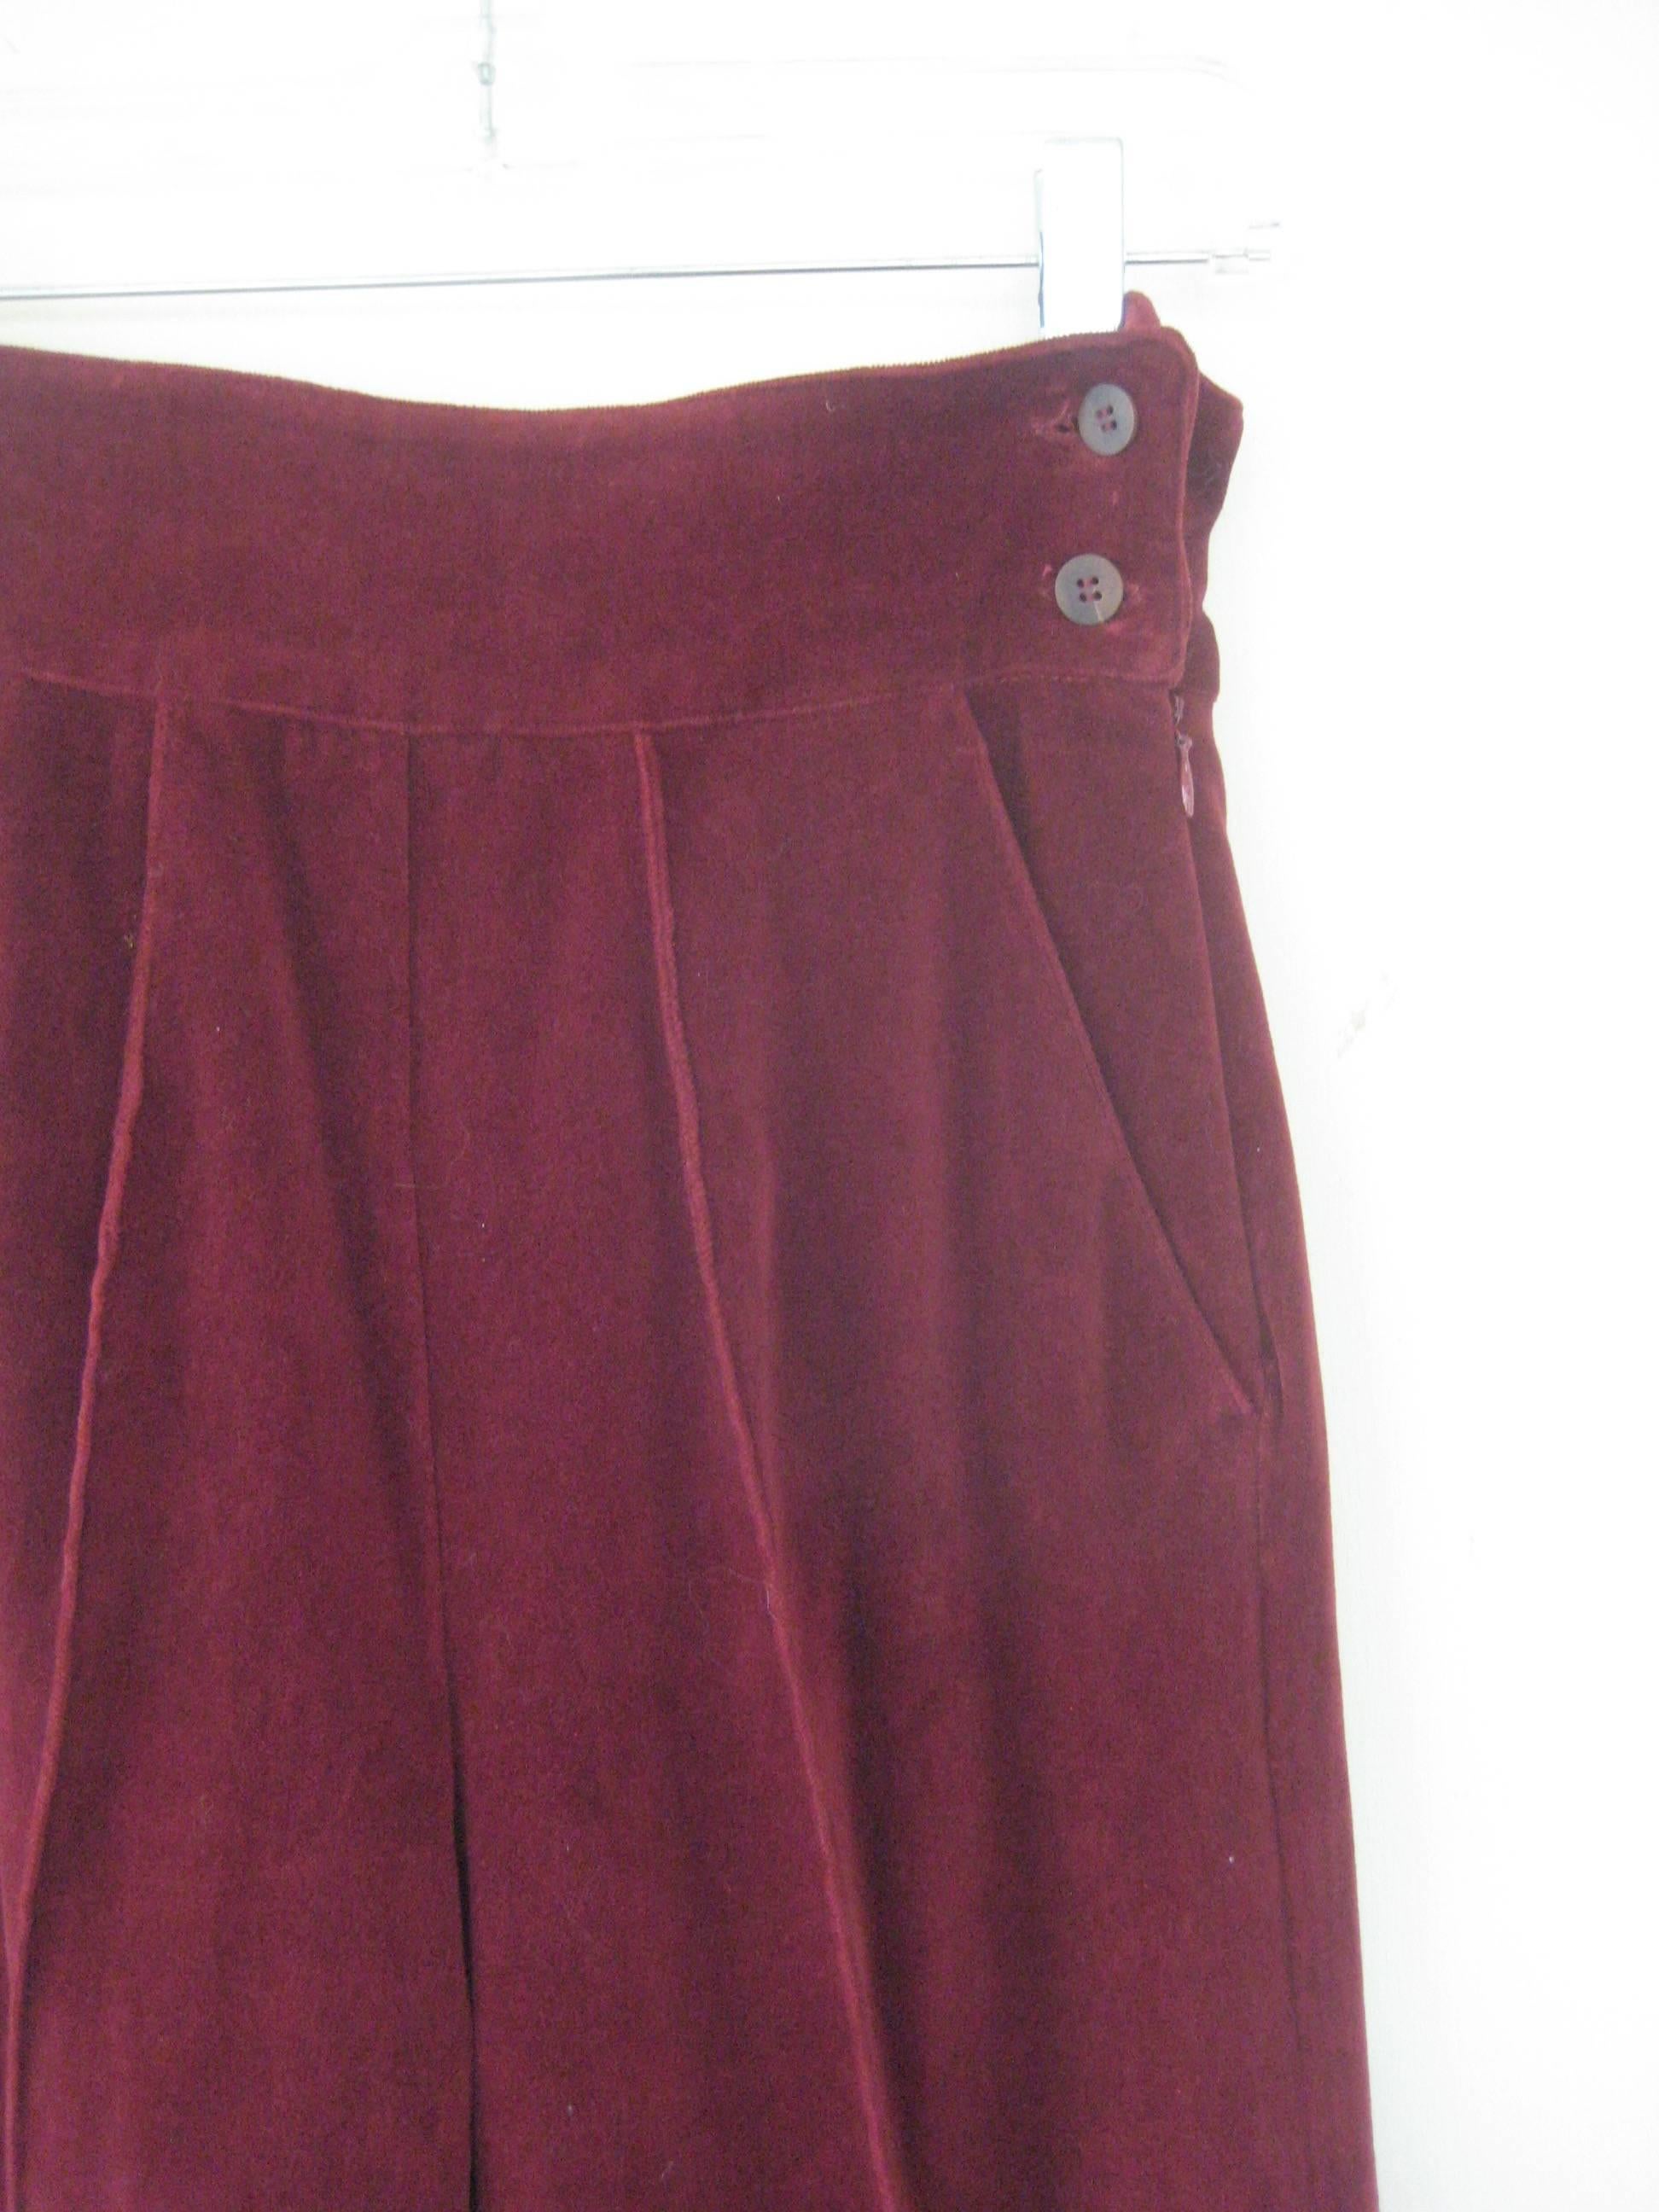 Classic Gigli high waist pant
Cotton velvet with 2% elastane for slight stretch 
Button and small zipper on one side 
Waist 26